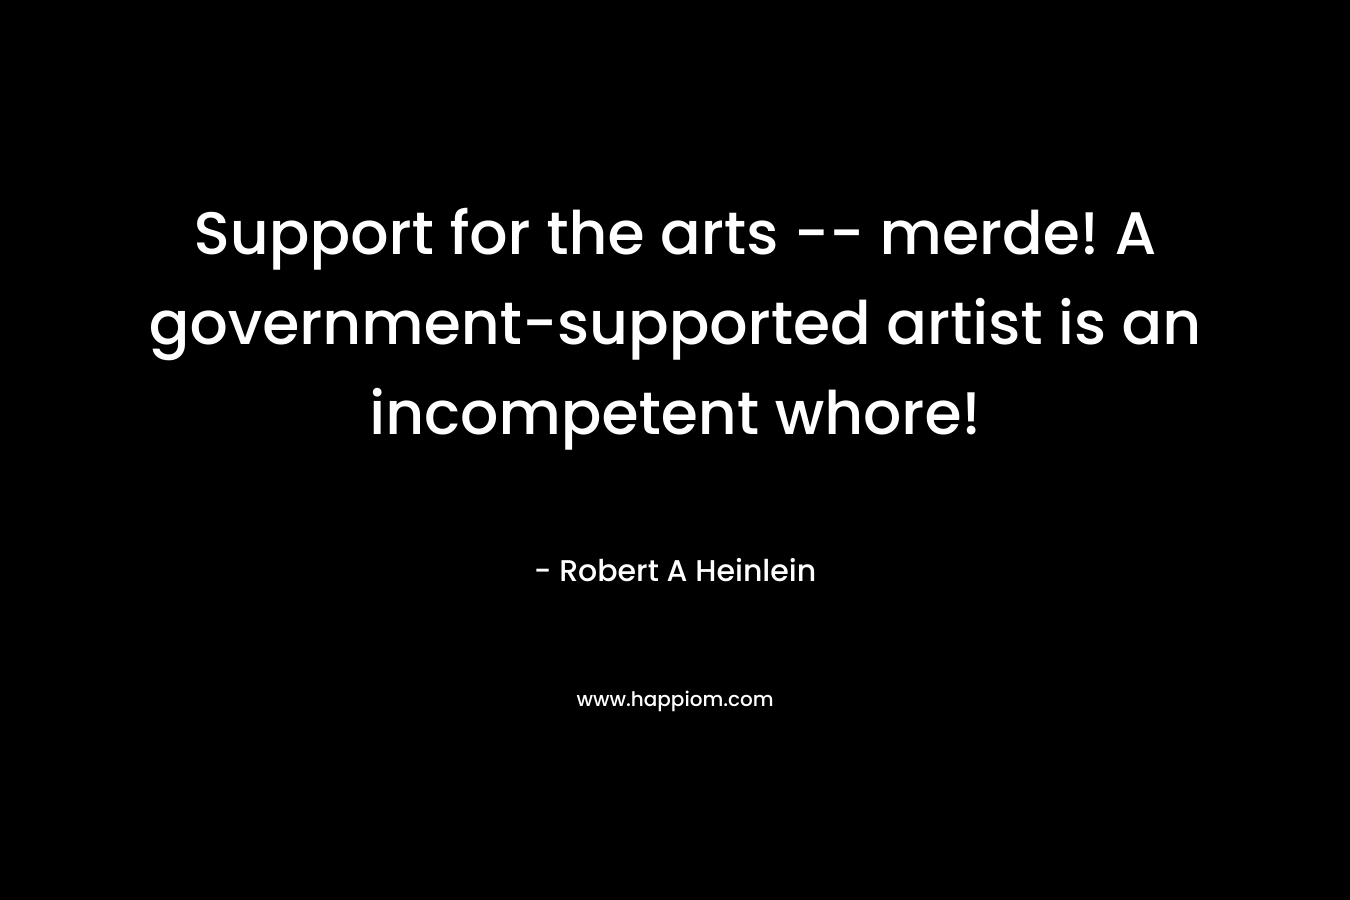 Support for the arts -- merde! A government-supported artist is an incompetent whore!